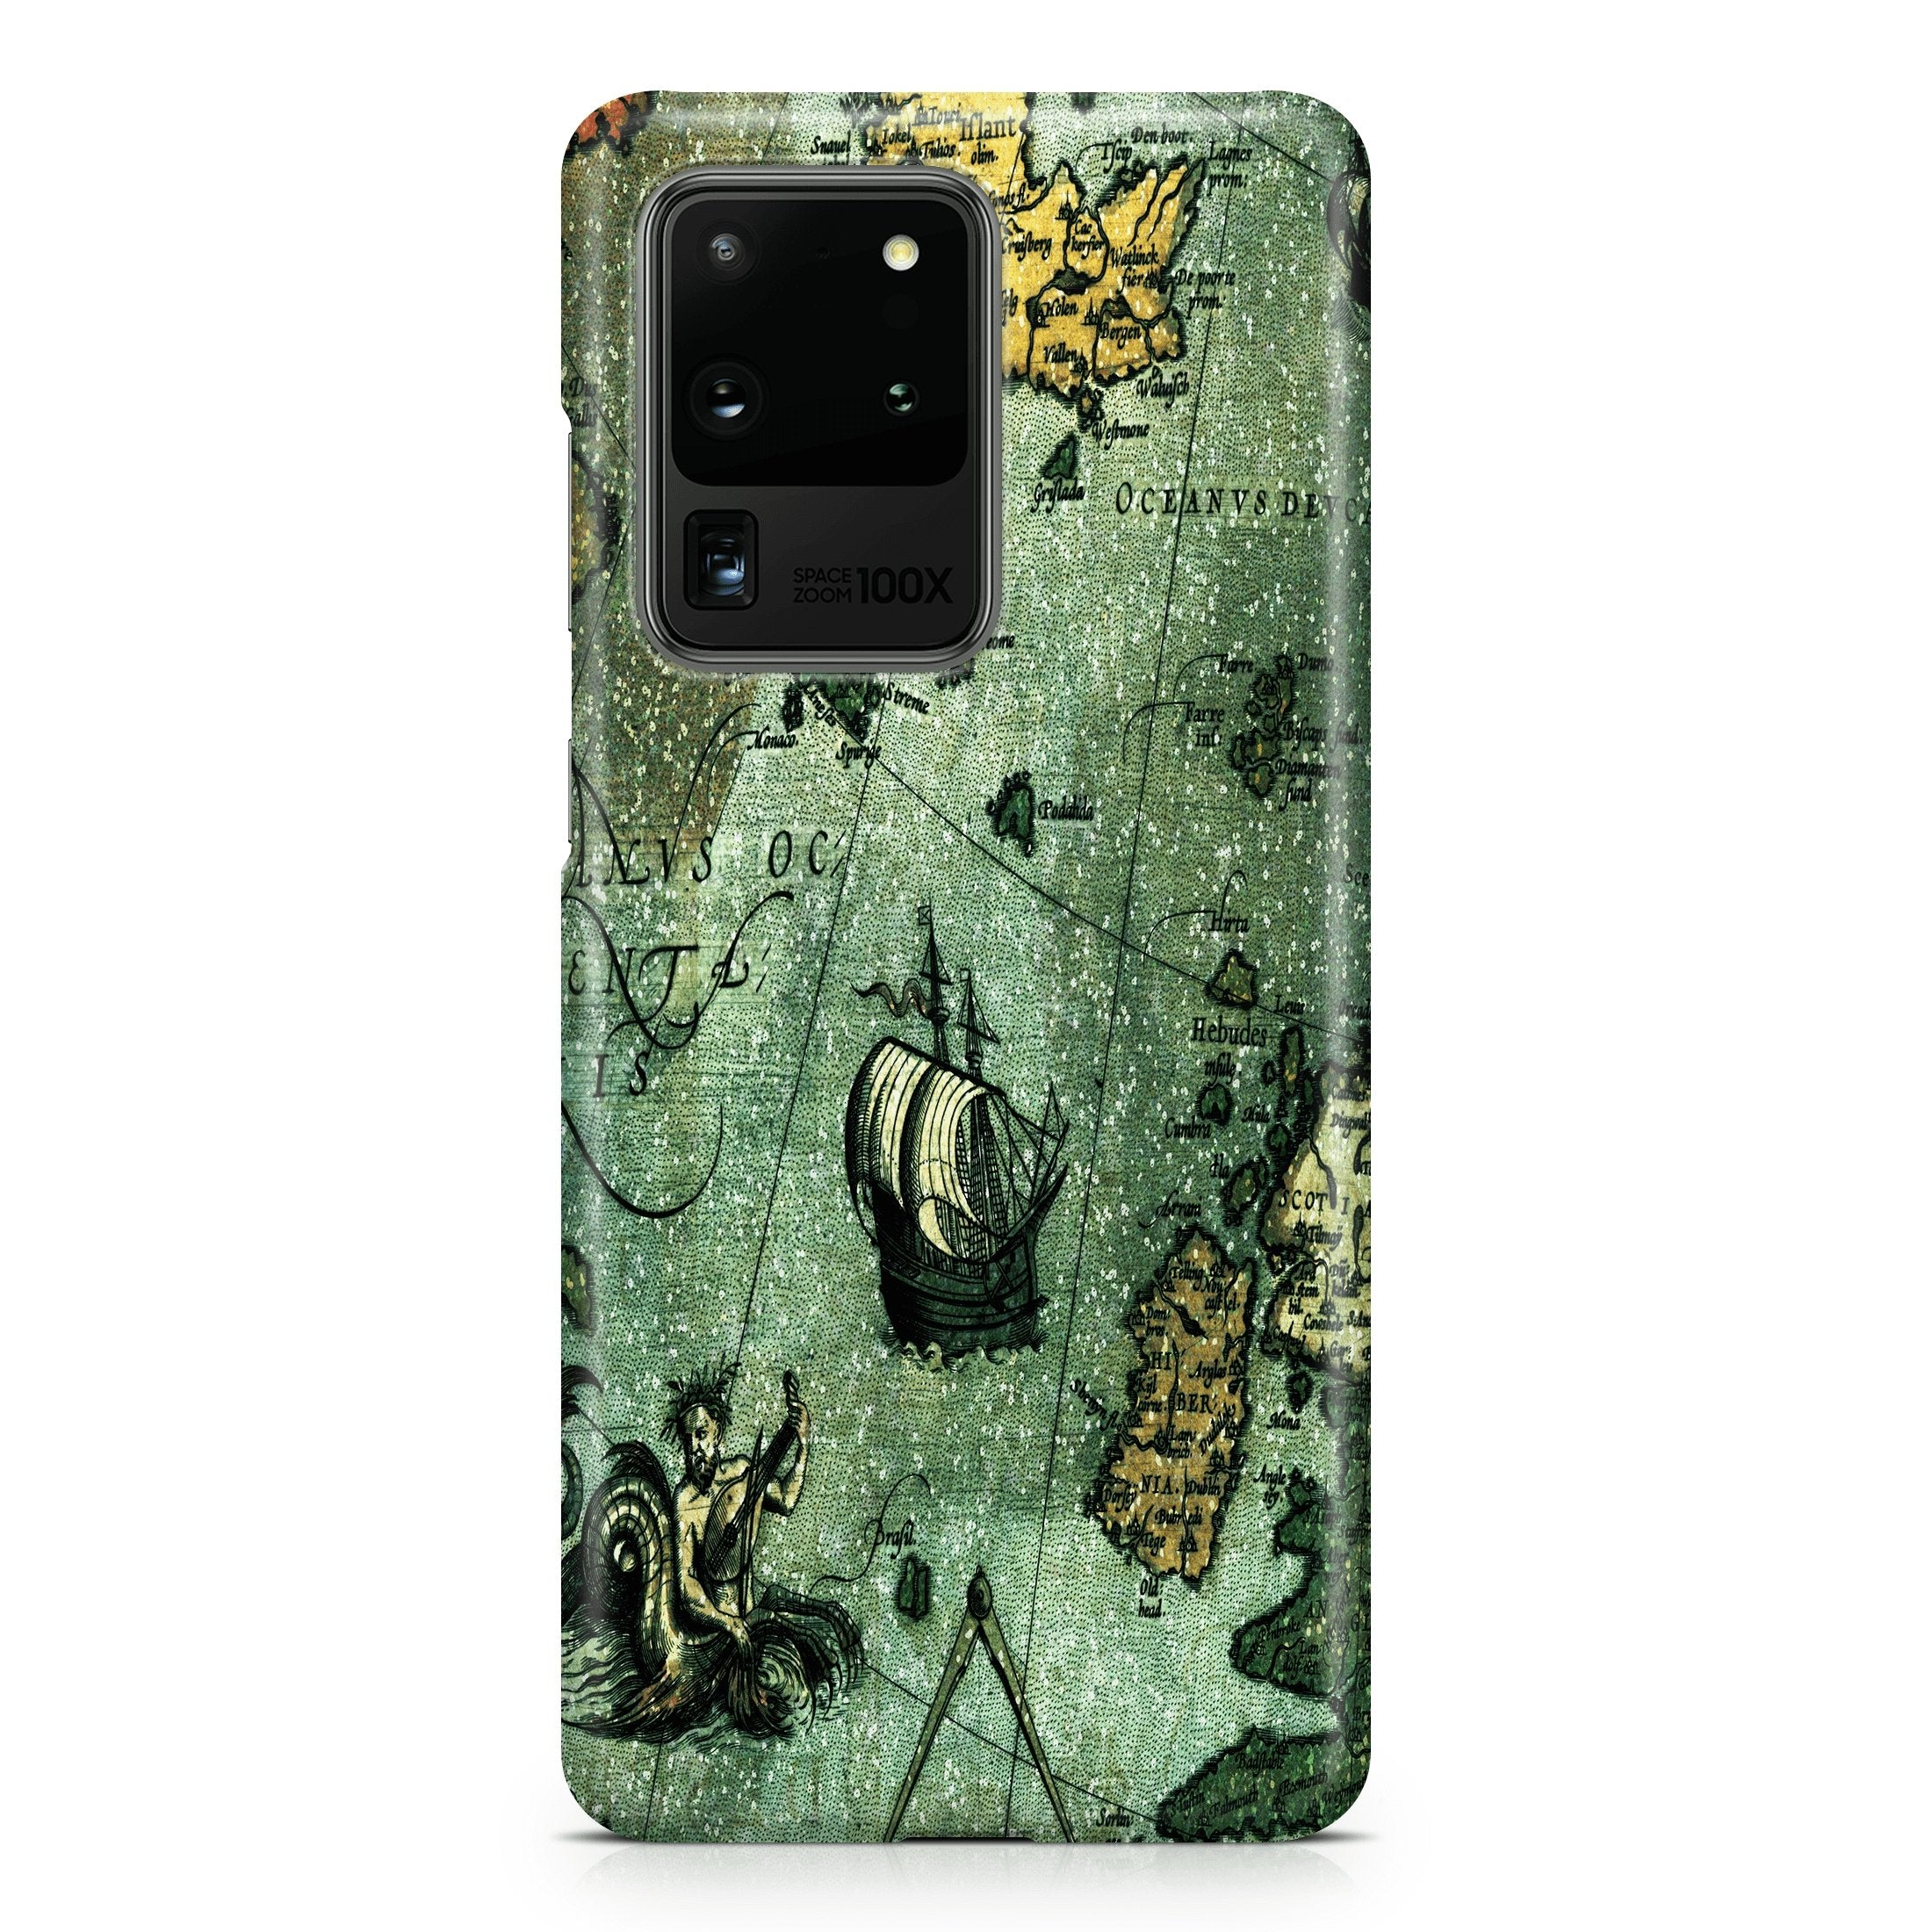 Ancient Water - Samsung phone case designs by CaseSwagger